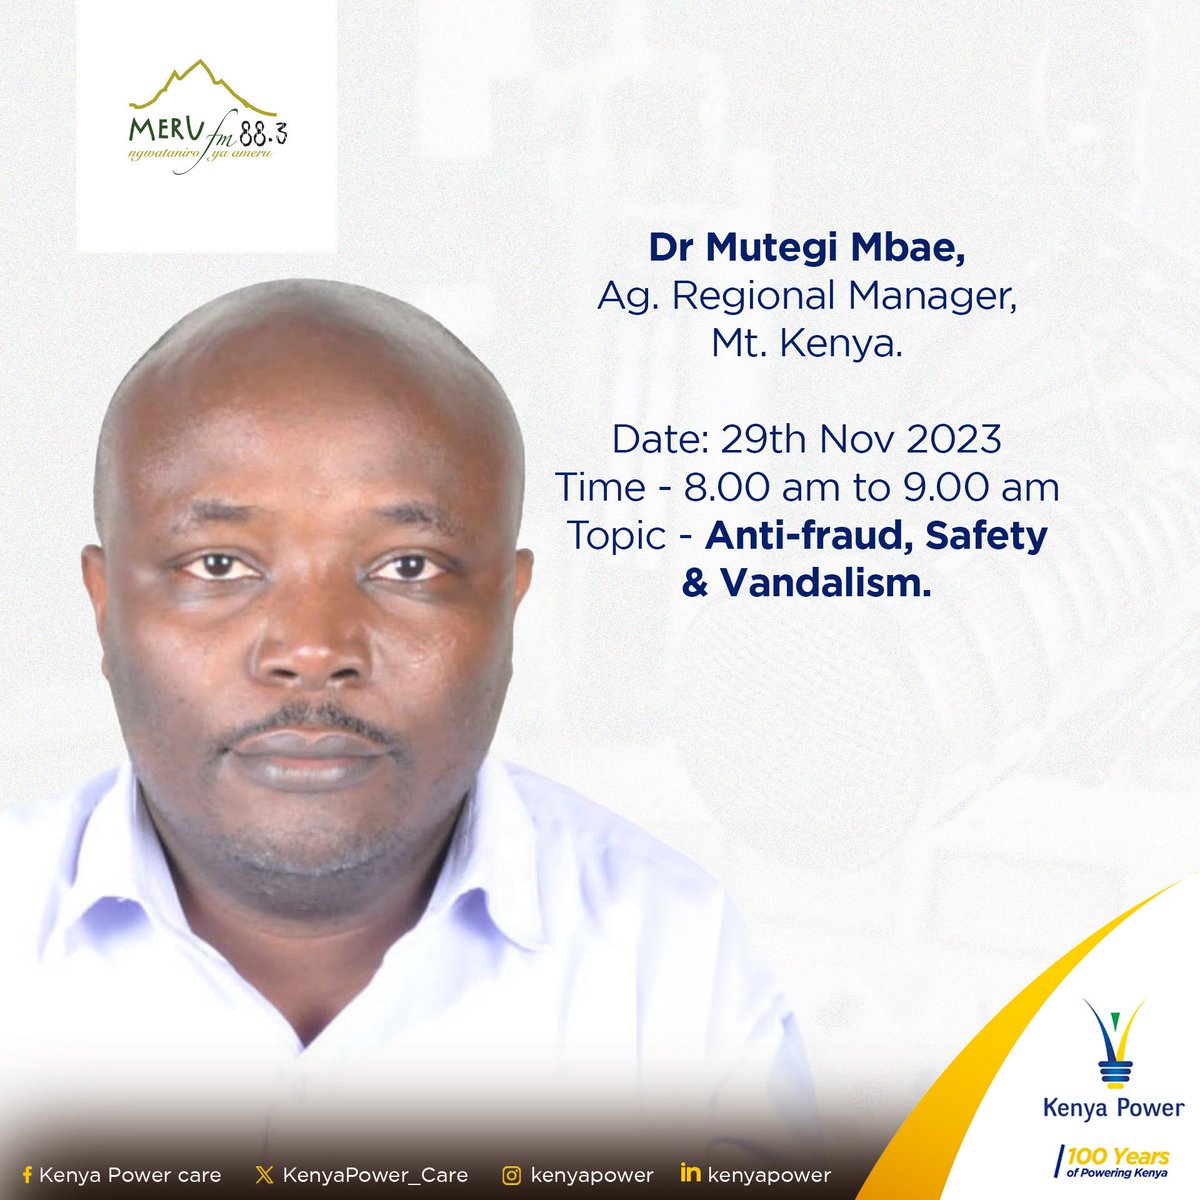 Dr. Mutegi Mbae, Ag. Regional Manager Mt. Kenya, takes the stage on @MeruFmOfficial's Tharia Ntuku, from 8.00 am to 9.00 am, shedding light on how we can empower our communities to safeguard against theft, fraud, vandalism, and public safety. Tune in! #KaaRada #EpukaNoma ^JC